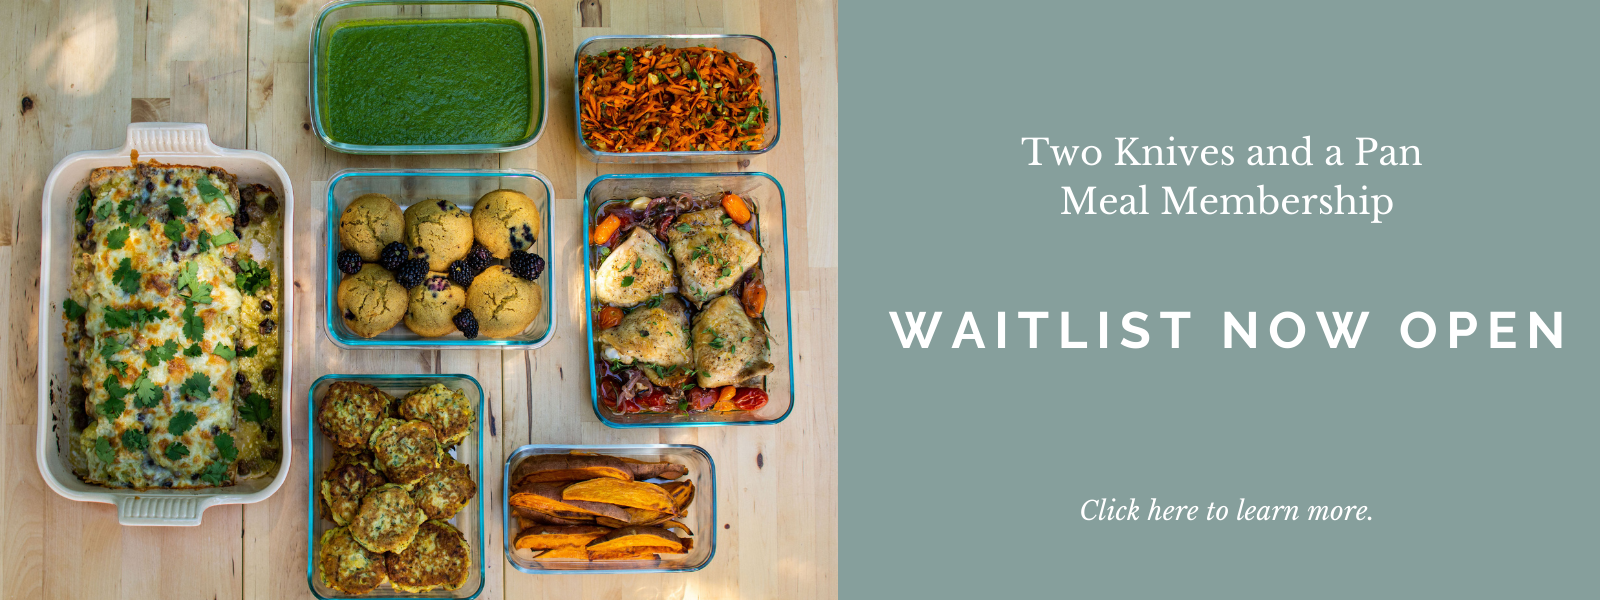 Two Knives and a Pan Meal Membership Waitlist Now Open. Click here to learn more.